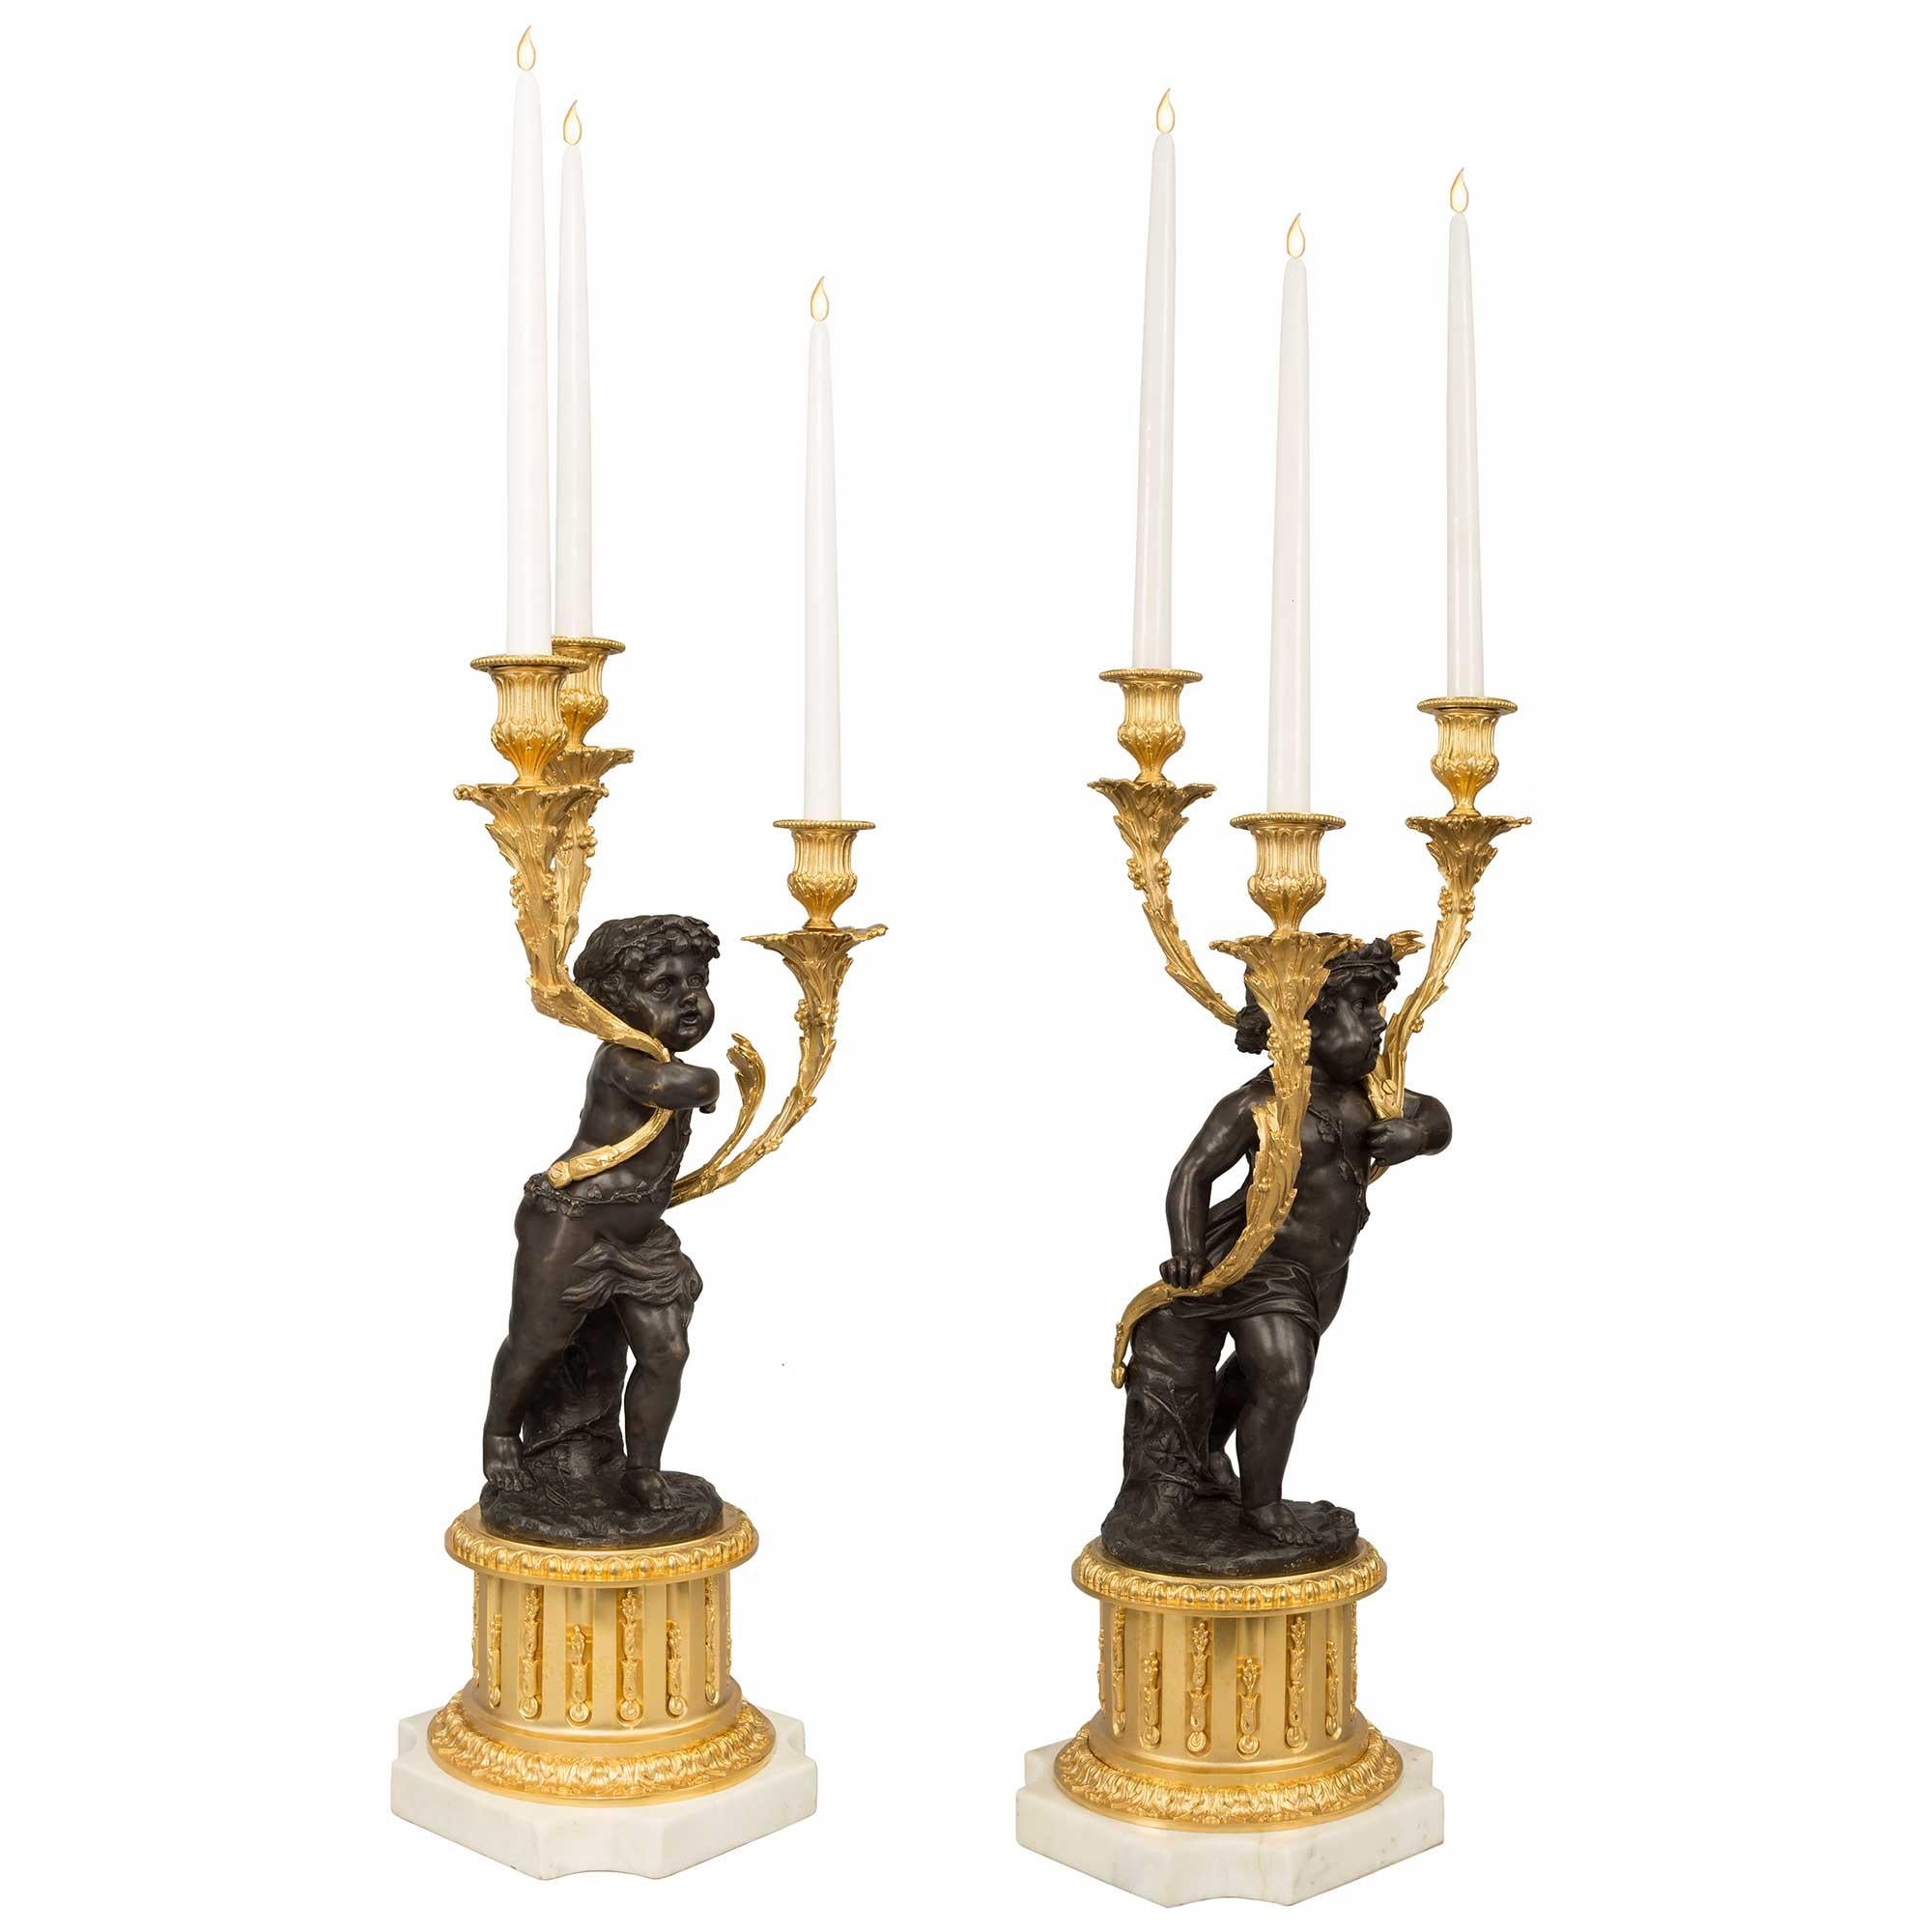 A very high quality true pair of French 19th century Louis XVI st. ormolu and patinated bronze, three arm candelabras. Each beautiful candelabra is raised by a square white Carrara marble base with concave corners. The ormolu socle pedestal displays